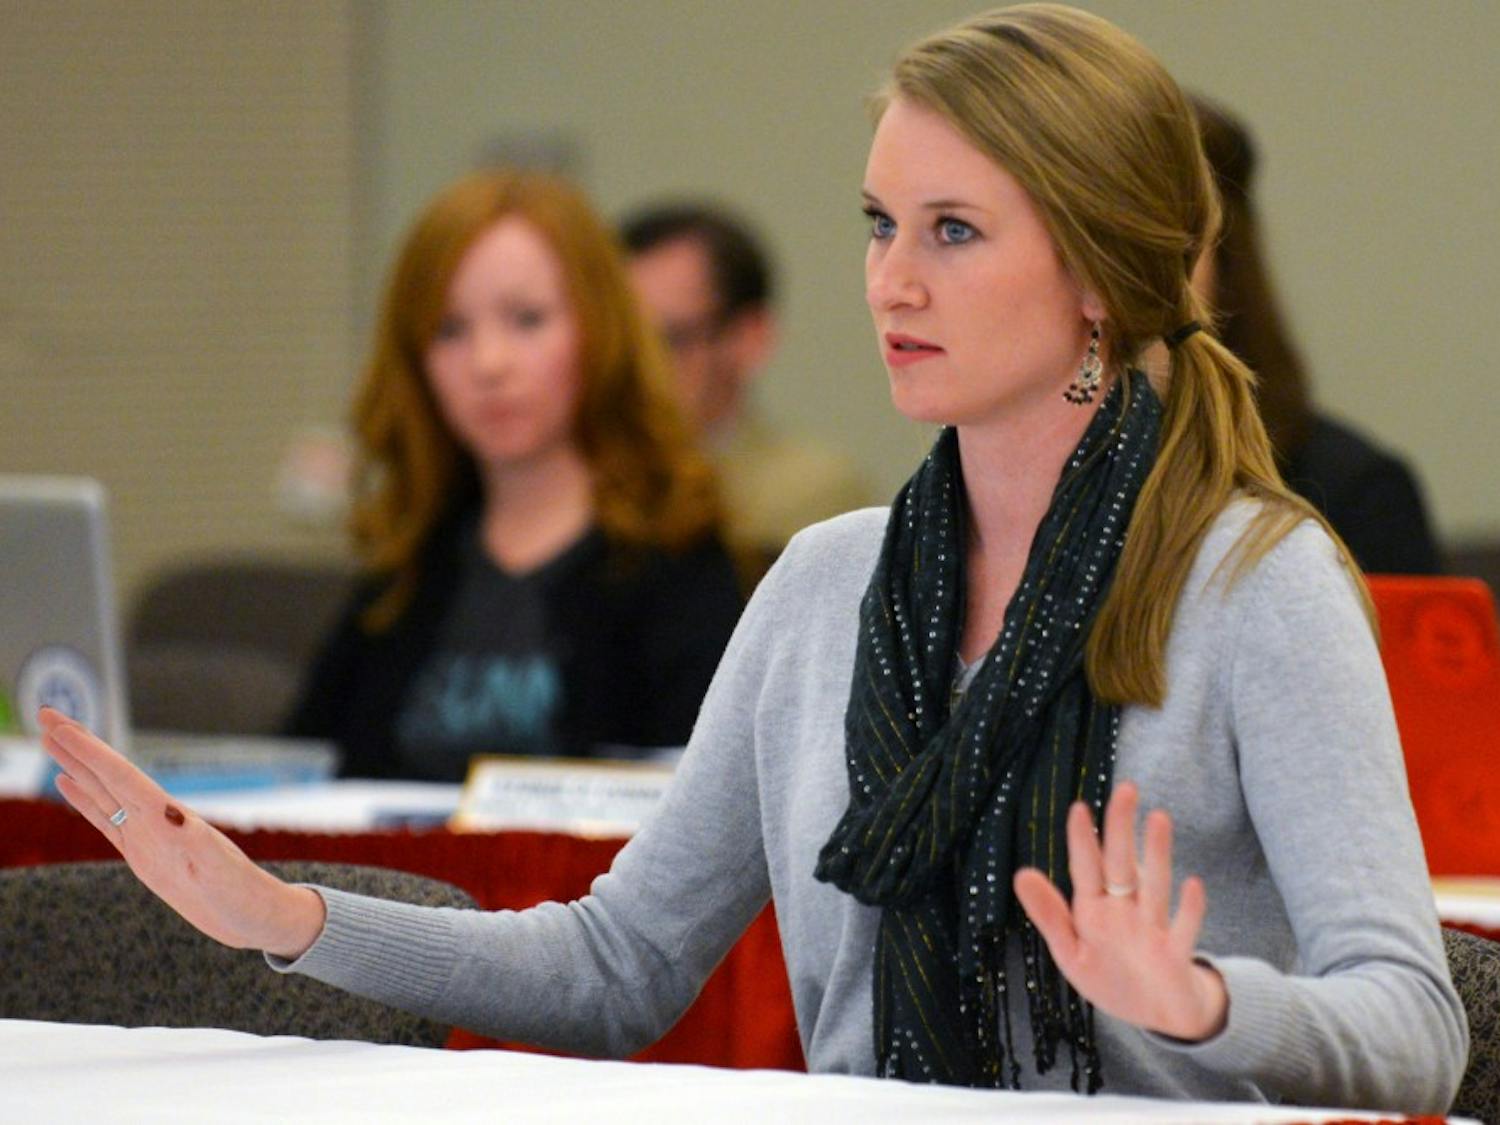 ASUNM president Jenna Hagengruber speaks at ASUNM's final fall 2015 senate meeting in the SUB Ballroom Wednesday night. A resolution was passed thanking LoboRESPECT for the work they have done to bring awareness about sexual assault on campus.&nbsp;